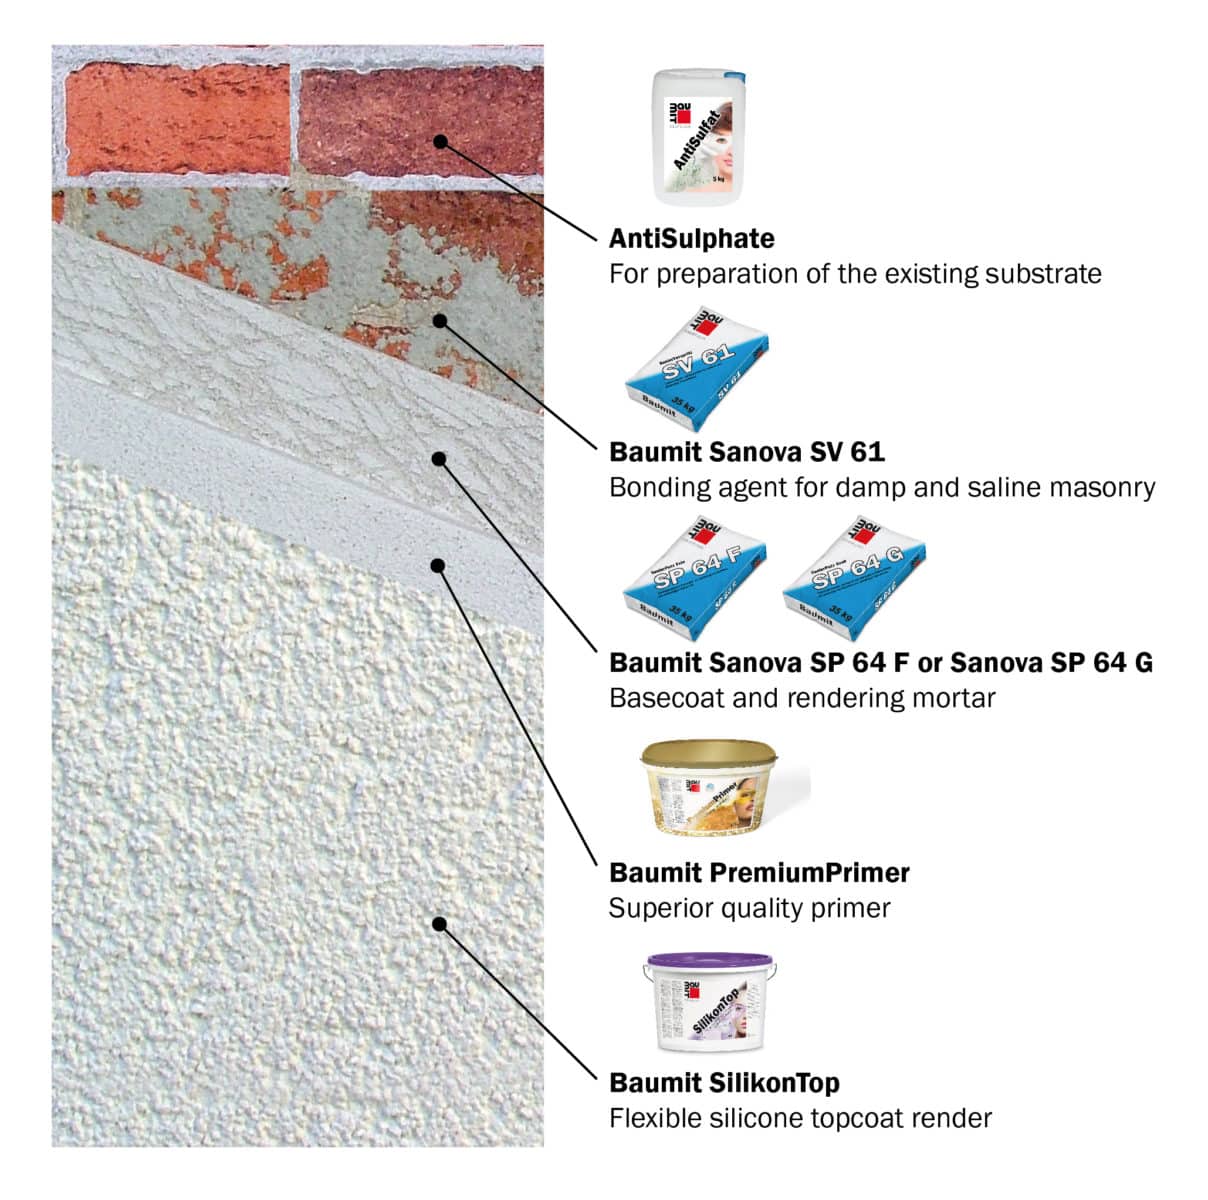 Material in action.

The Baumit SP64 F works as both a base coat and top coat plaster which can be used internally and externally. Here the build-up shown is for an external situation where a brick wall has been re-rendered. The system is then finished with a silicate finish render such as Baumit SilikatTop or Baumit NanoporTop